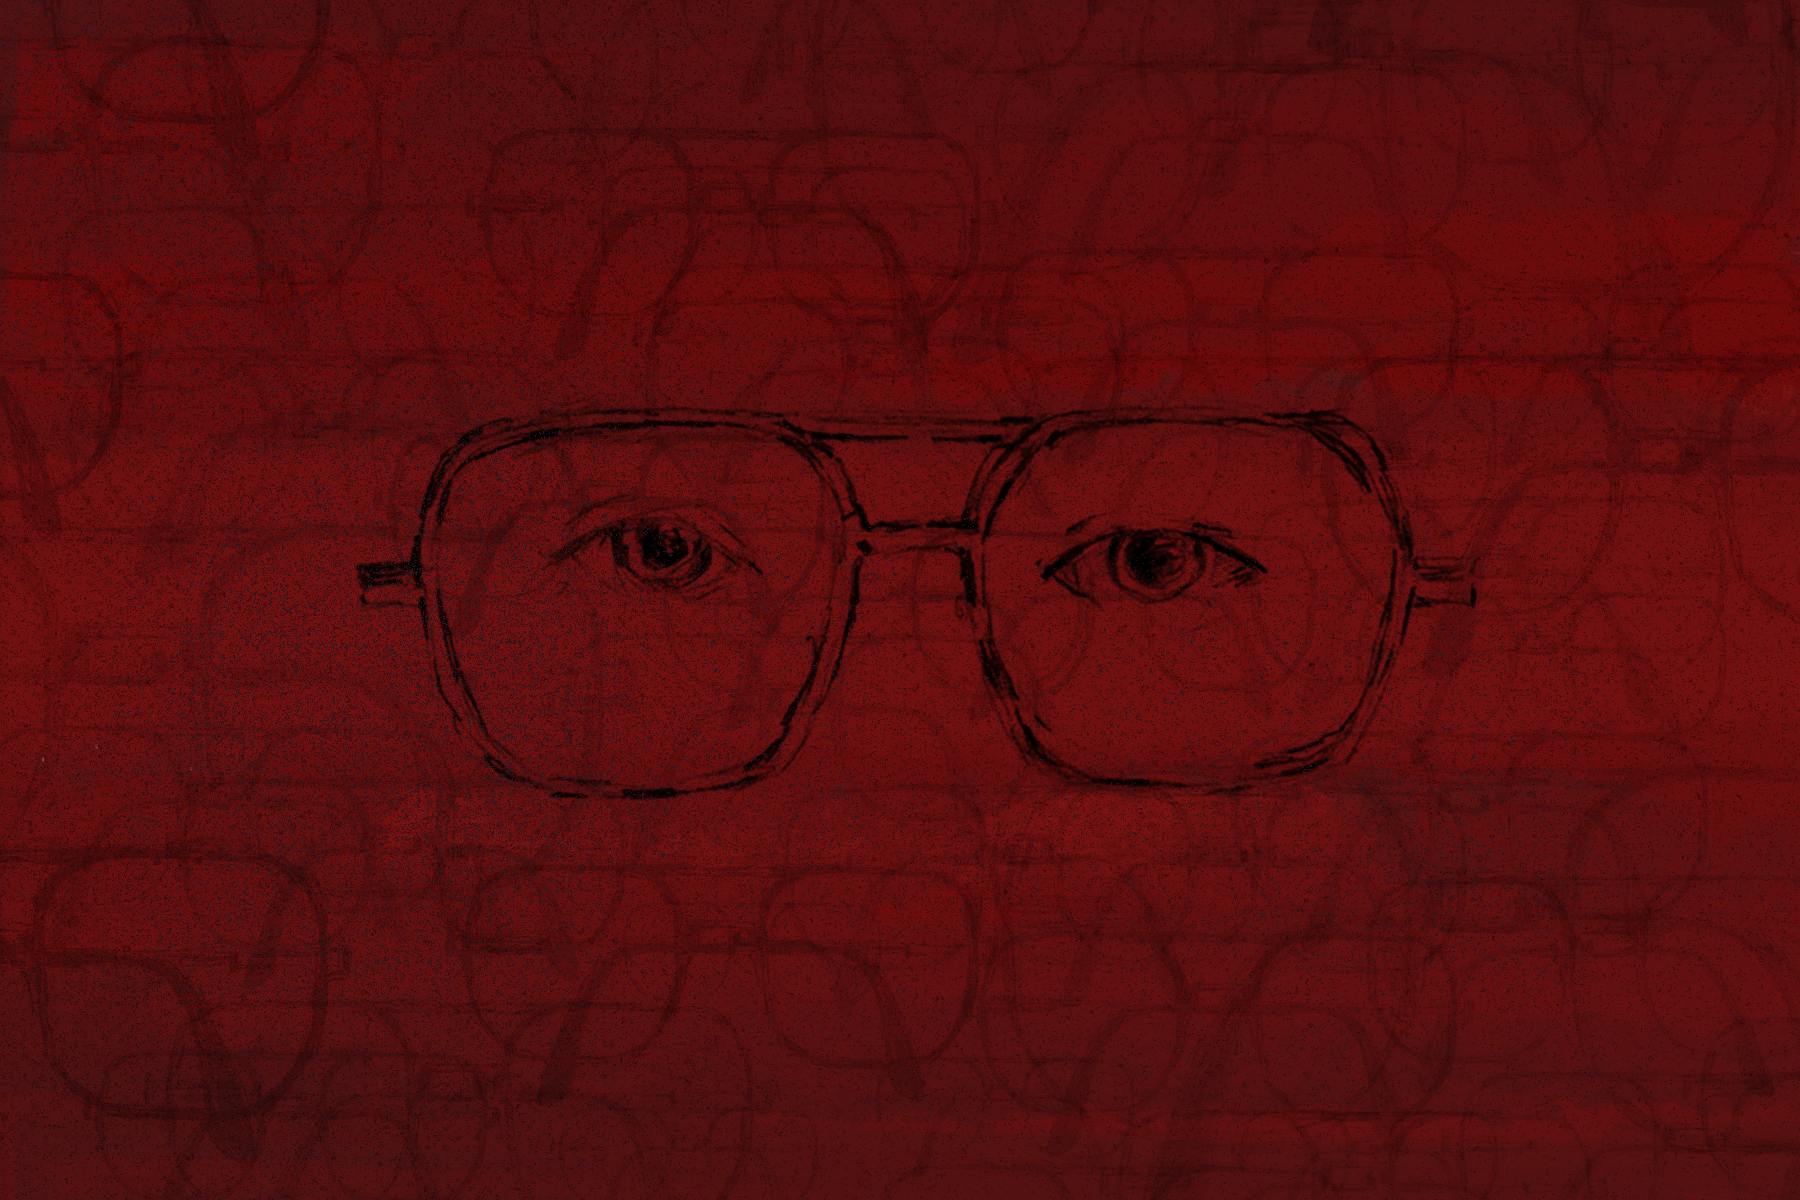 In an article about Monster: The Jeffrey Dahmer Story, an illustration of Dahmer's eyes and glasses